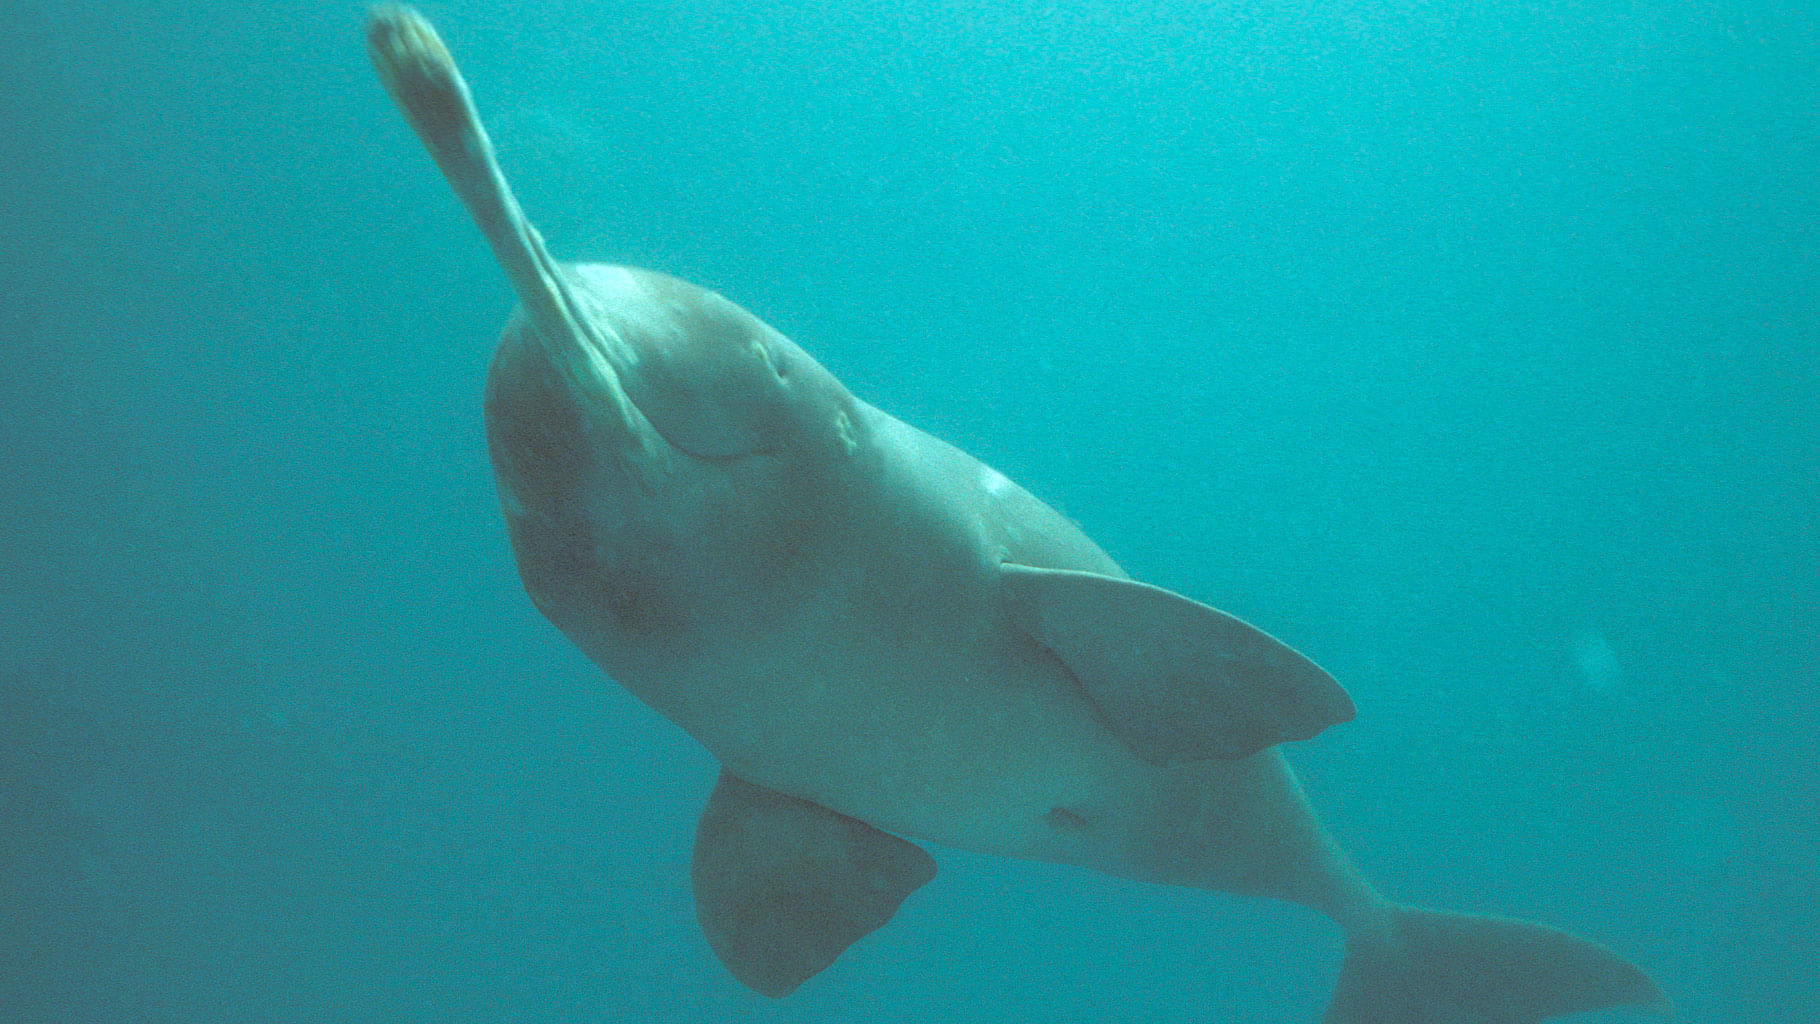 

Only 2,500 to 3,000 Gangetic dolphins are estimated to be left. (Photo: Francois Xavier Pelletier/WWF Canon)